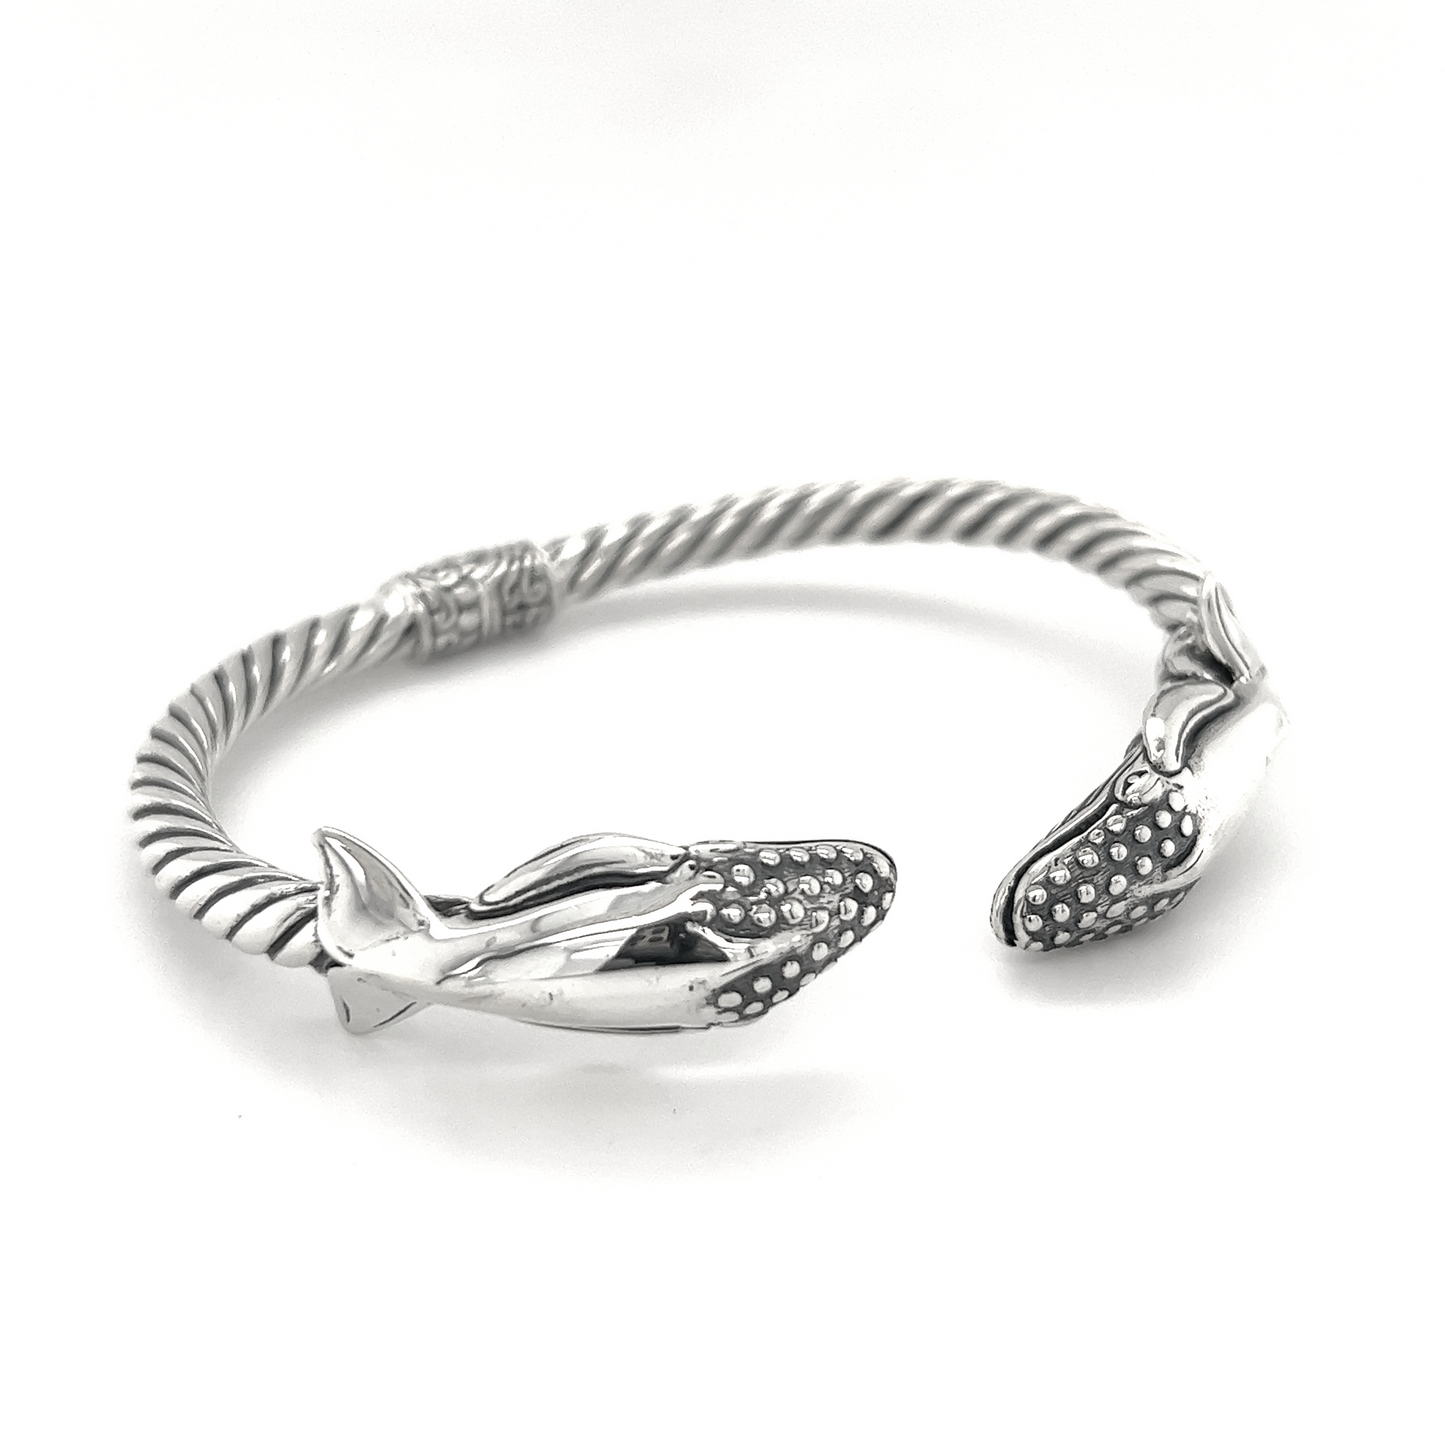 An Exquisite Whale Hinge Bracelet with a pair of dolphins, inspired by the beauty of the ocean in Santa Cruz, by Super Silver.